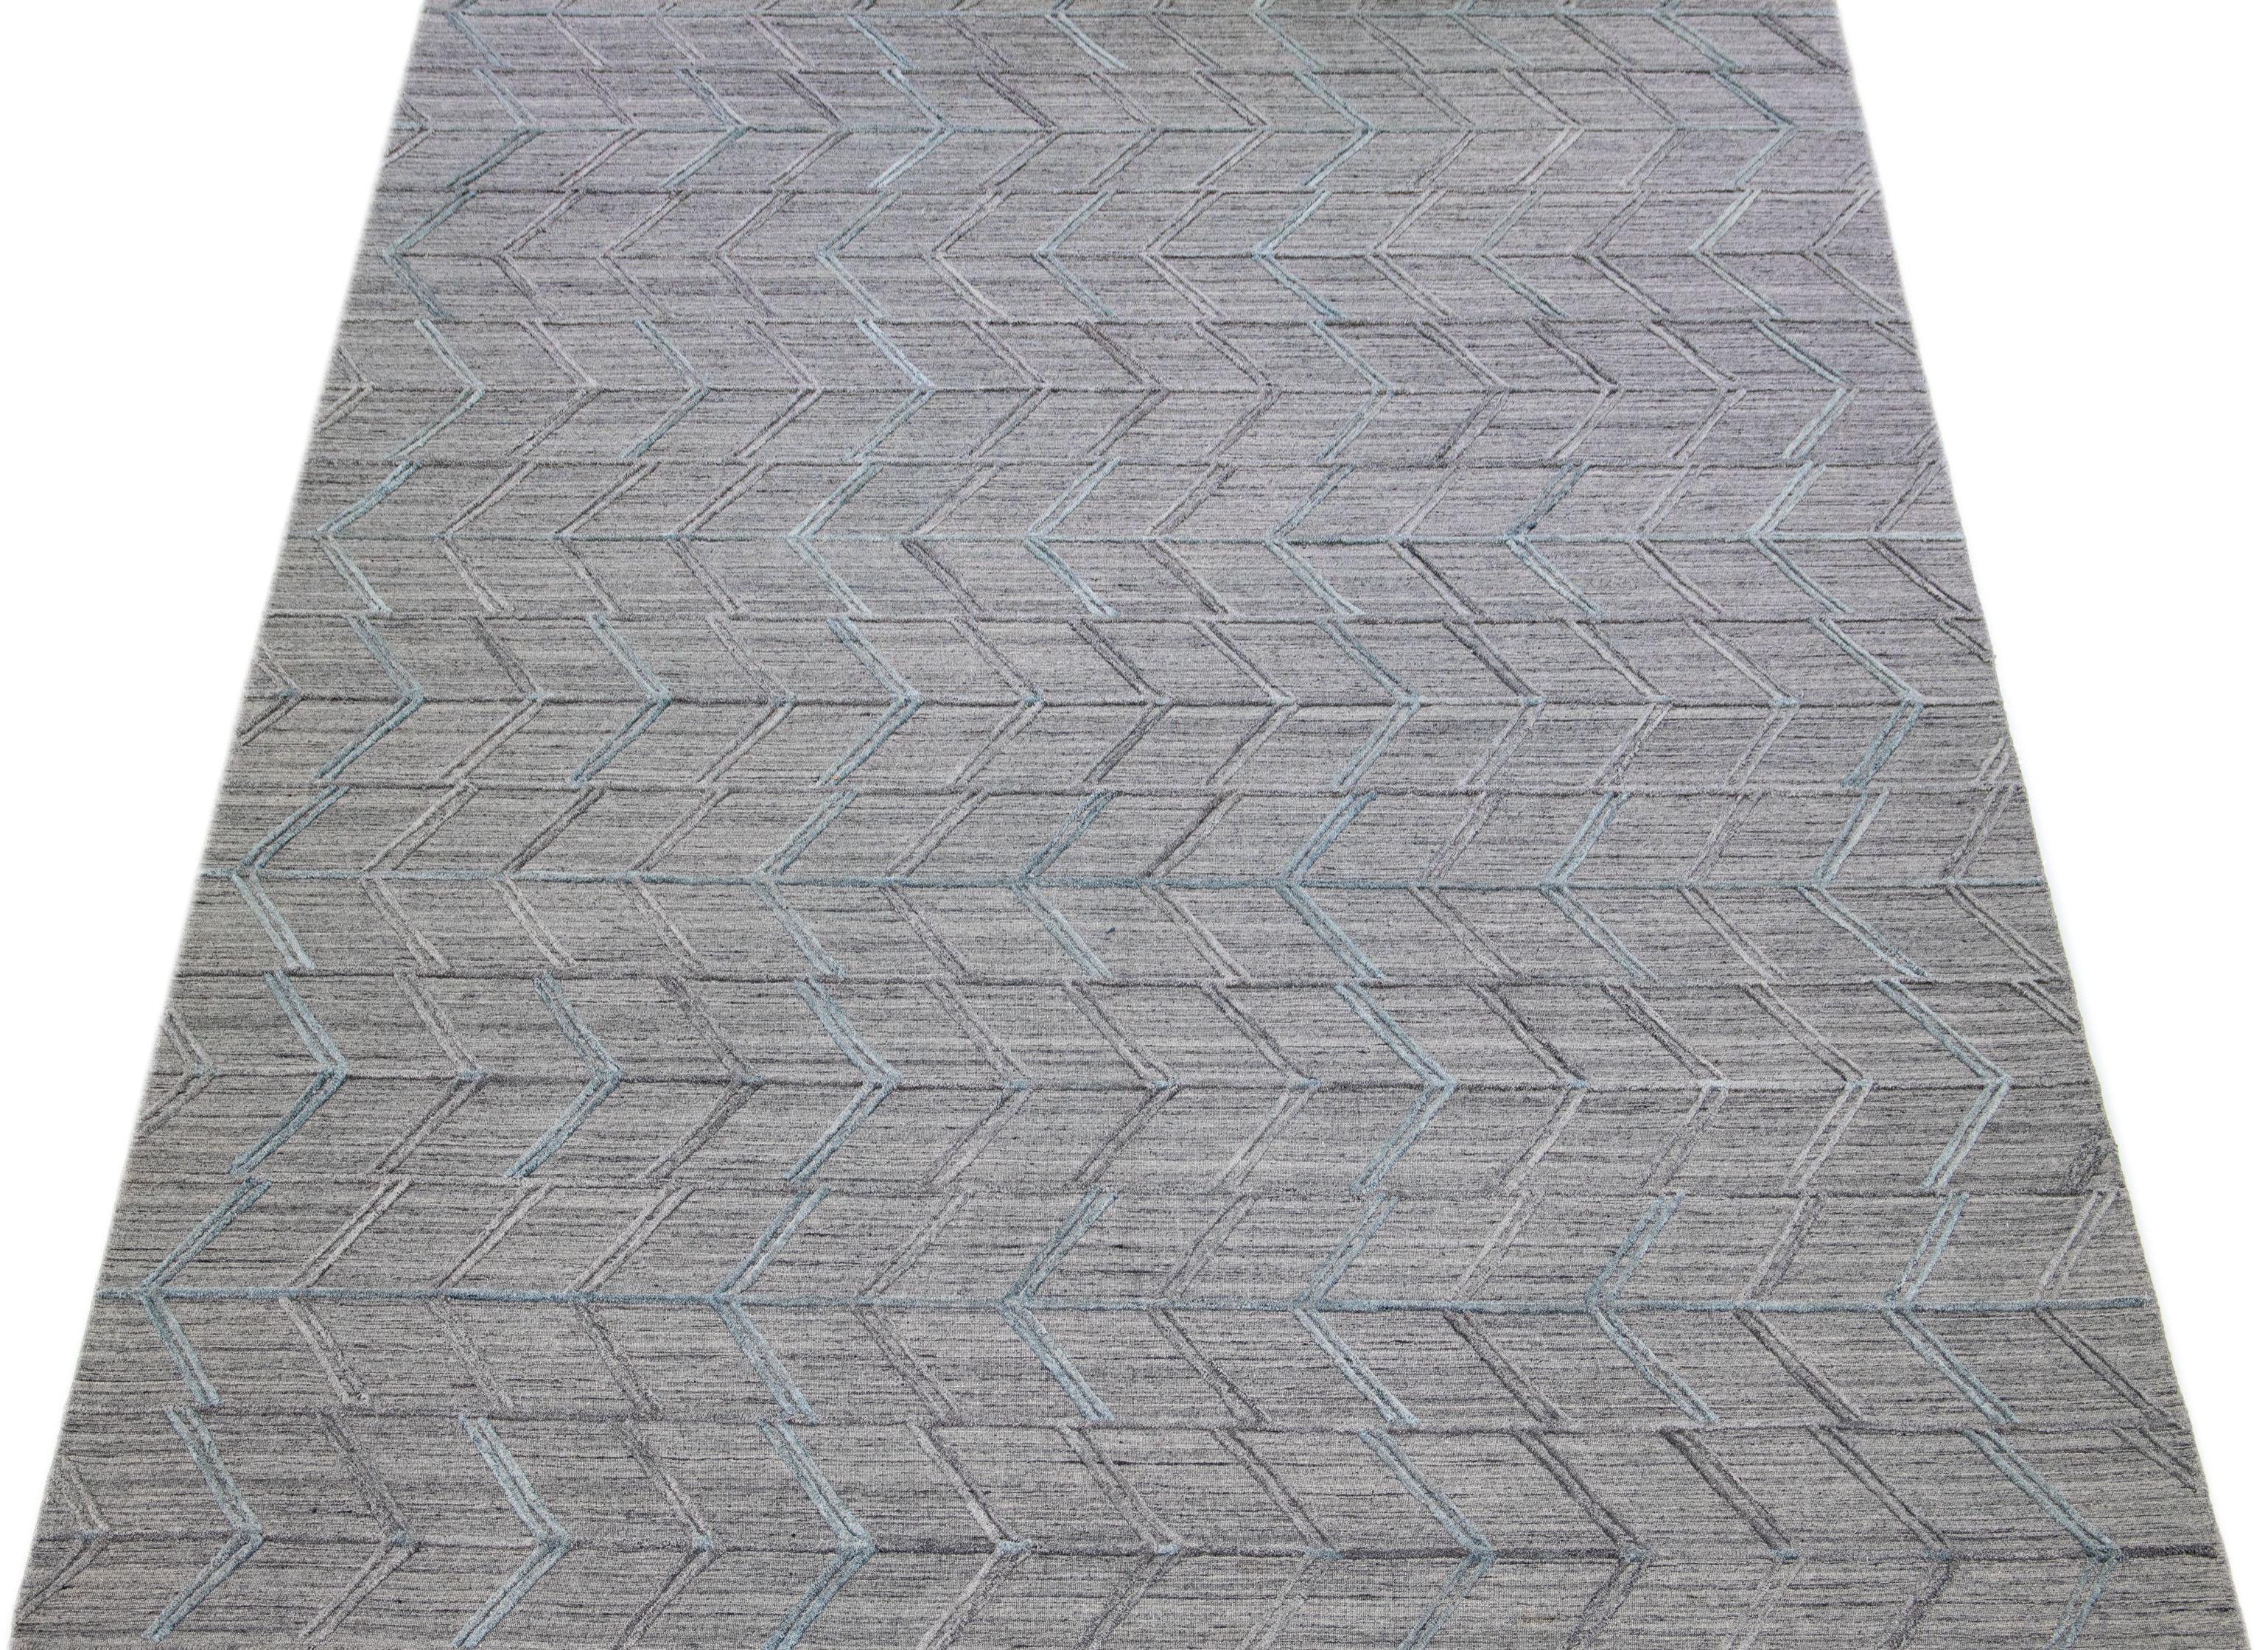 Experience the beauty of a modern Indian transitional flat-weave hand knotted wool rug with a sophisticated grey field. Adding to its elegant charm is the textured and graceful light blue geometric pattern, which runs throughout the entire